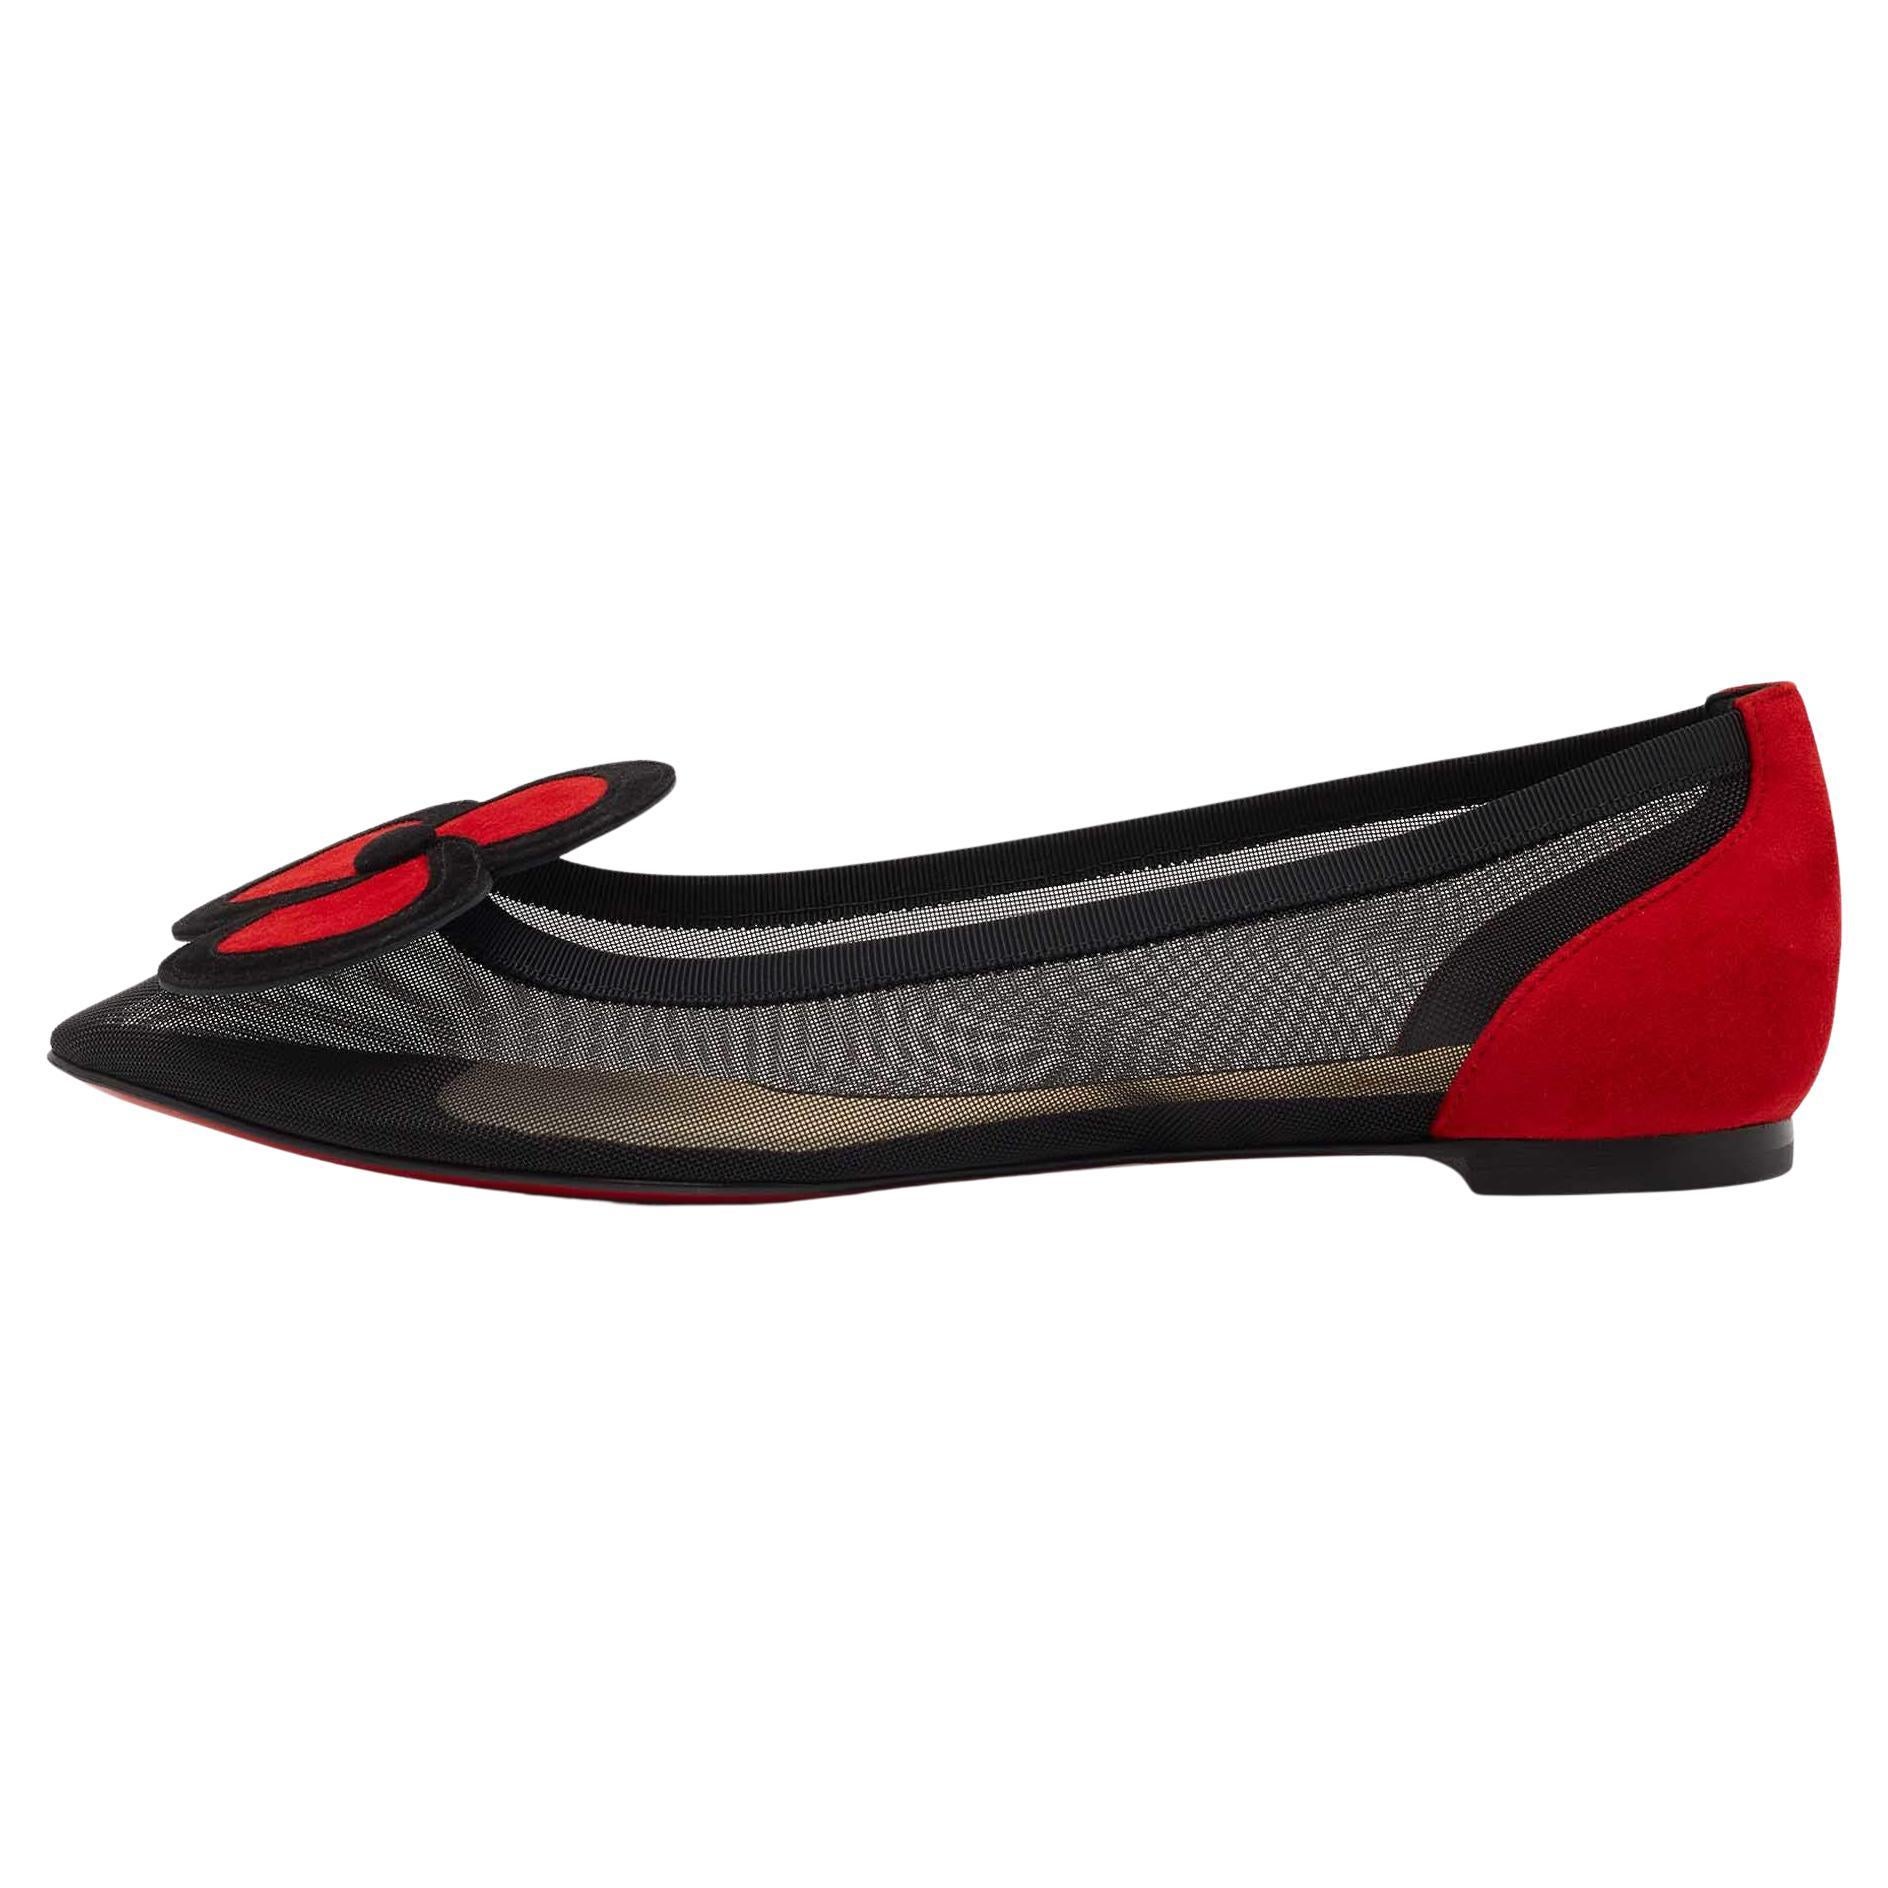 Christian Louboutin Black/Red Suede and Mesh Pansy Ballet Flats Size 38